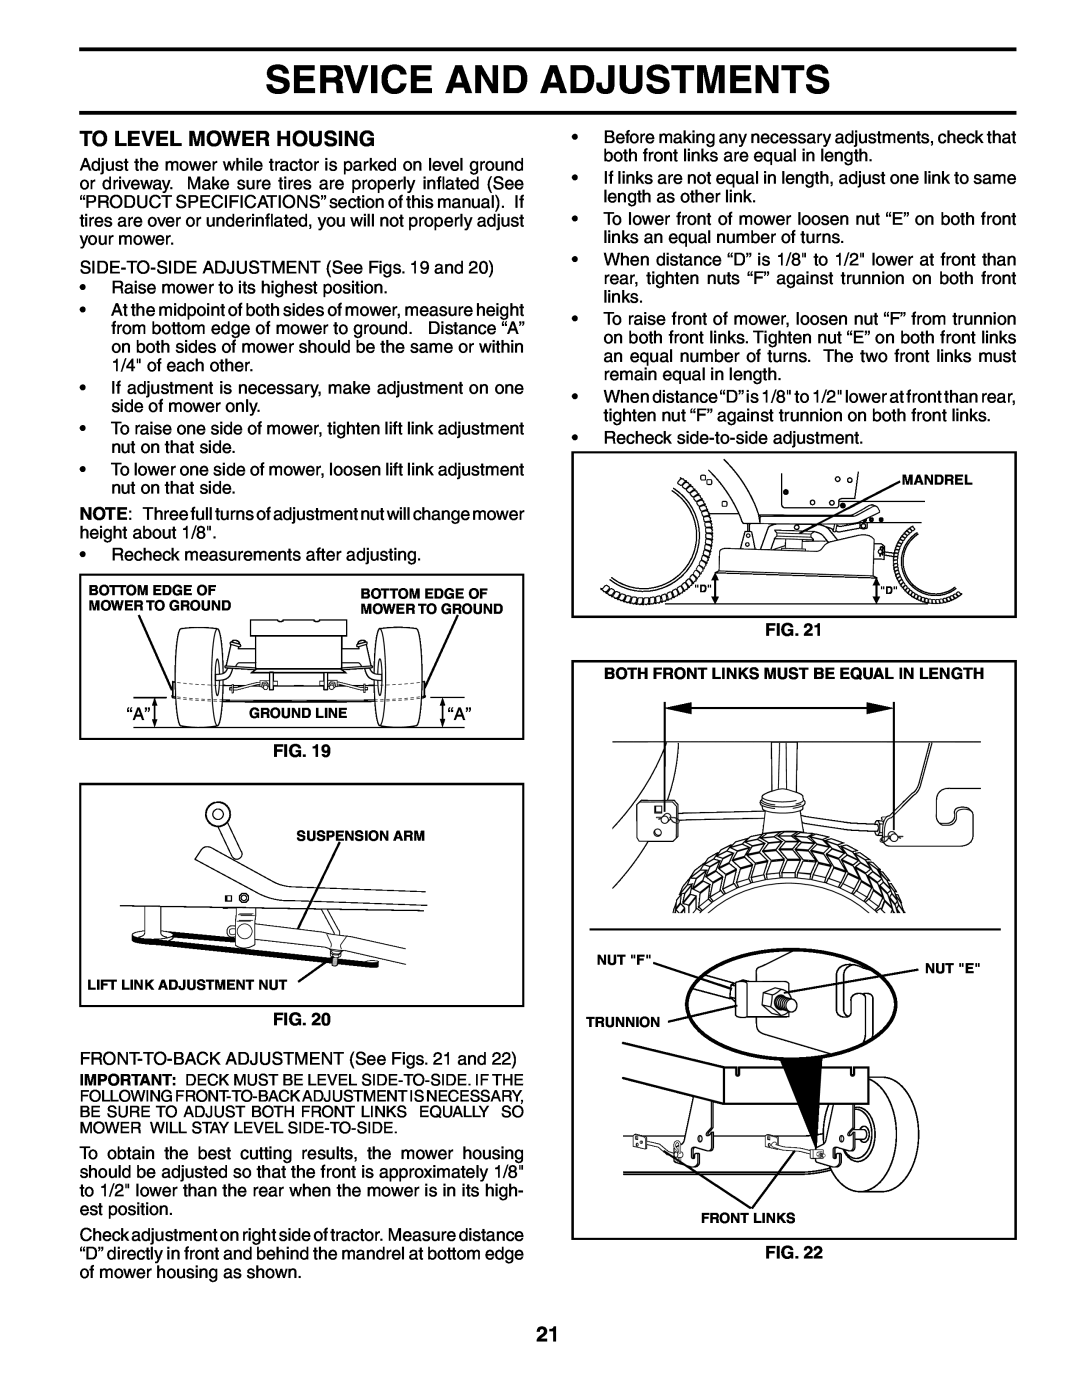 Poulan 184617 owner manual To Level Mower Housing, Service And Adjustments, Both Front Links Must Be Equal In Length 